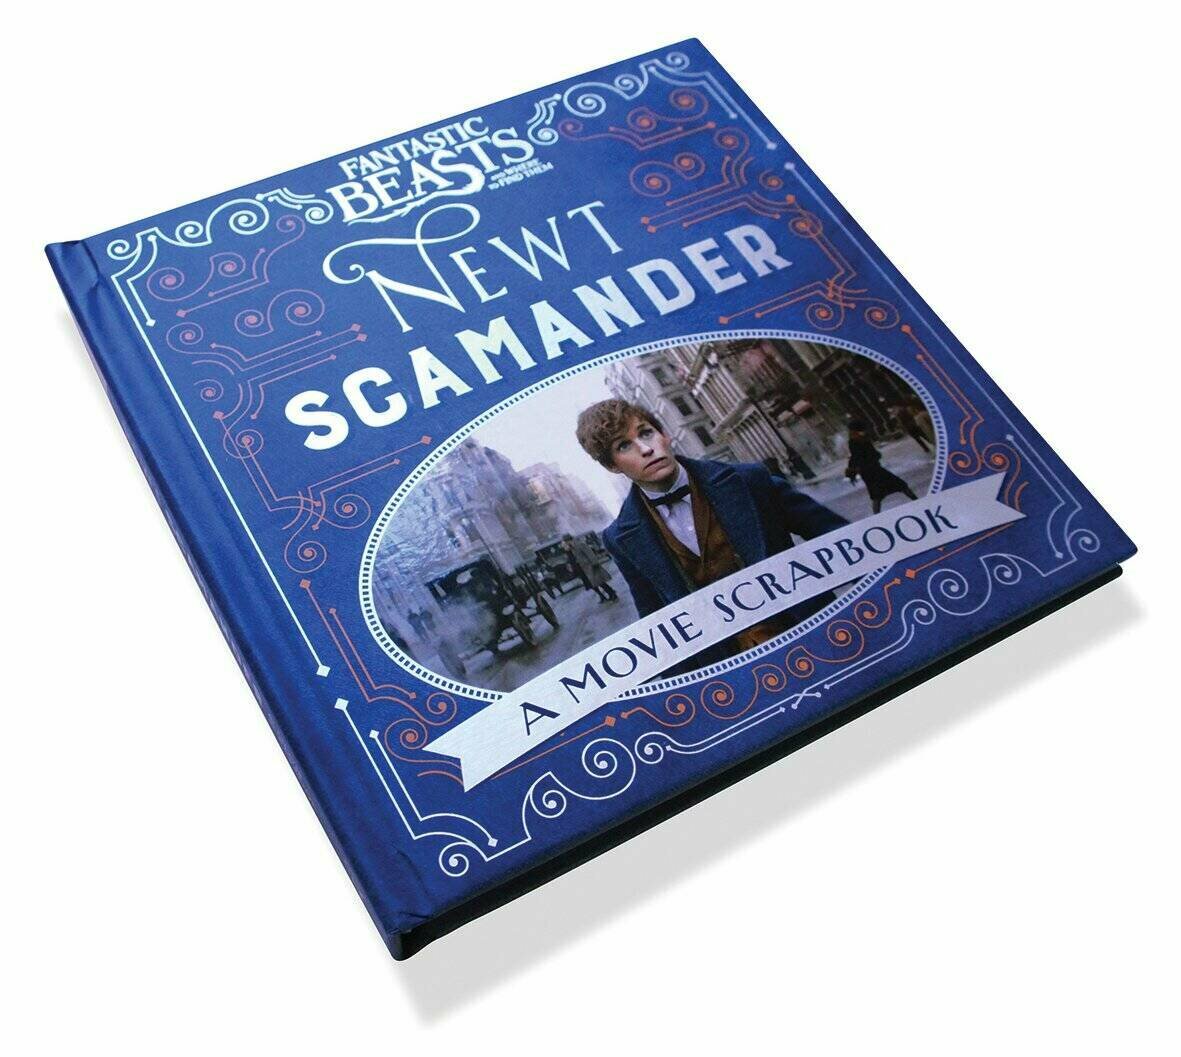 Fantastic Beasts and Where to Find Them. Newt Scamander: A Movie Scrapbook - фото №4